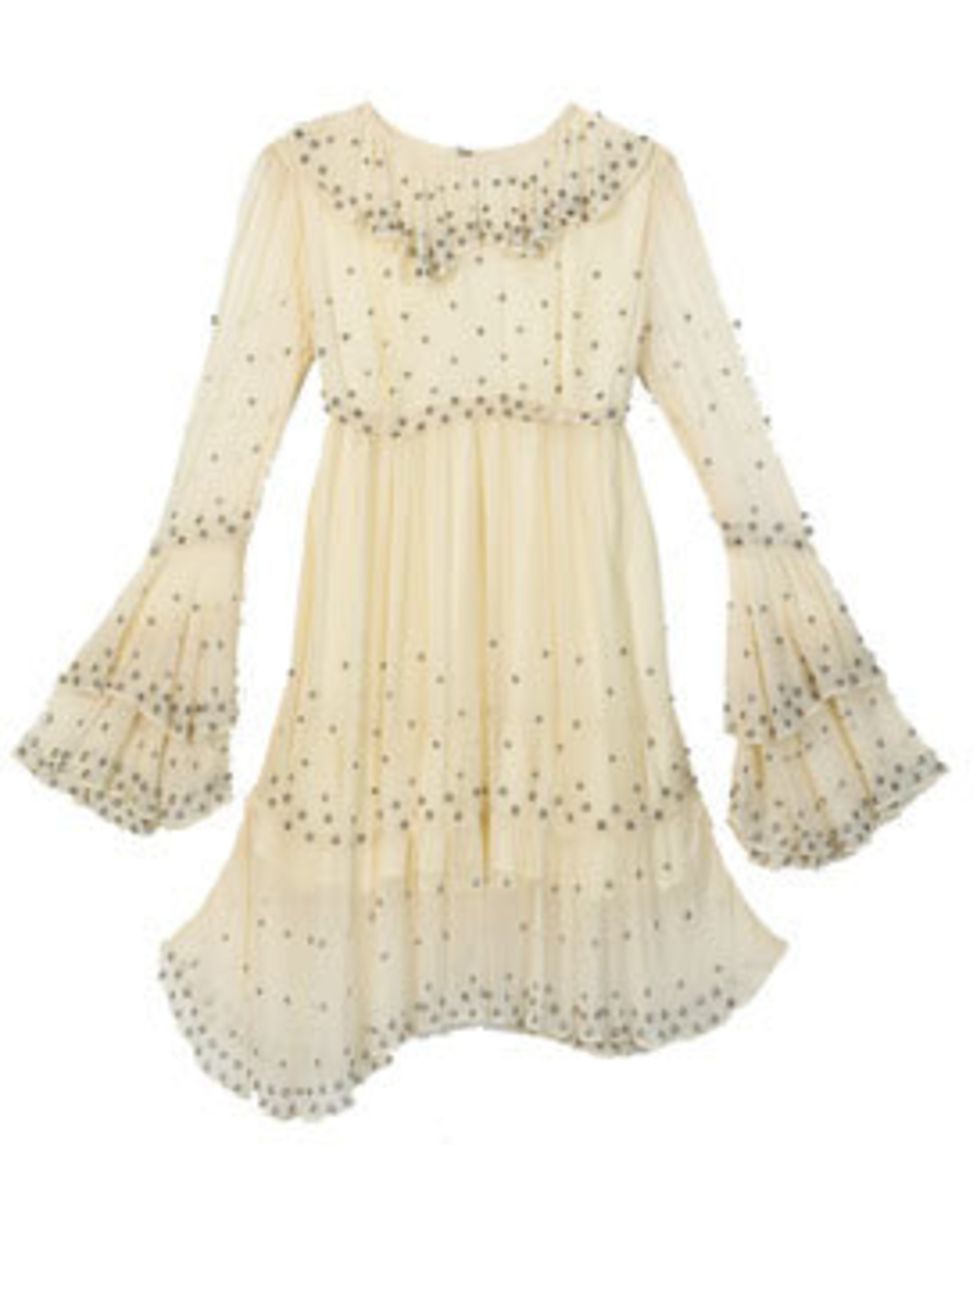 <p>Cream dress, £95, by Christopher Kane for Topshop (0845 121 4519)</p>